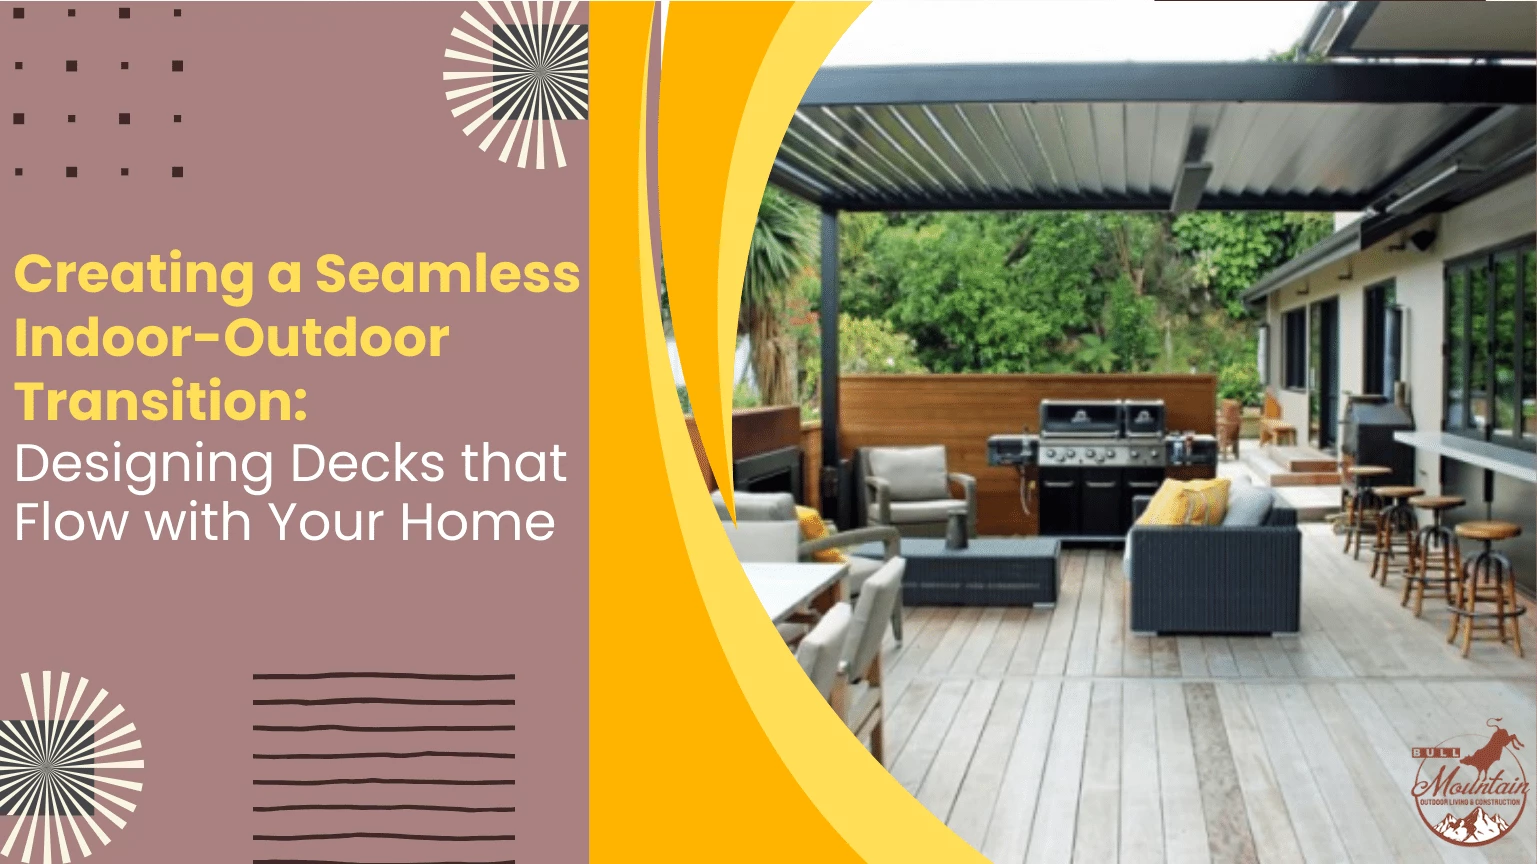 Creating a Seamless Indoor-Outdoor Transition Designing Decks that Flow with Your Home